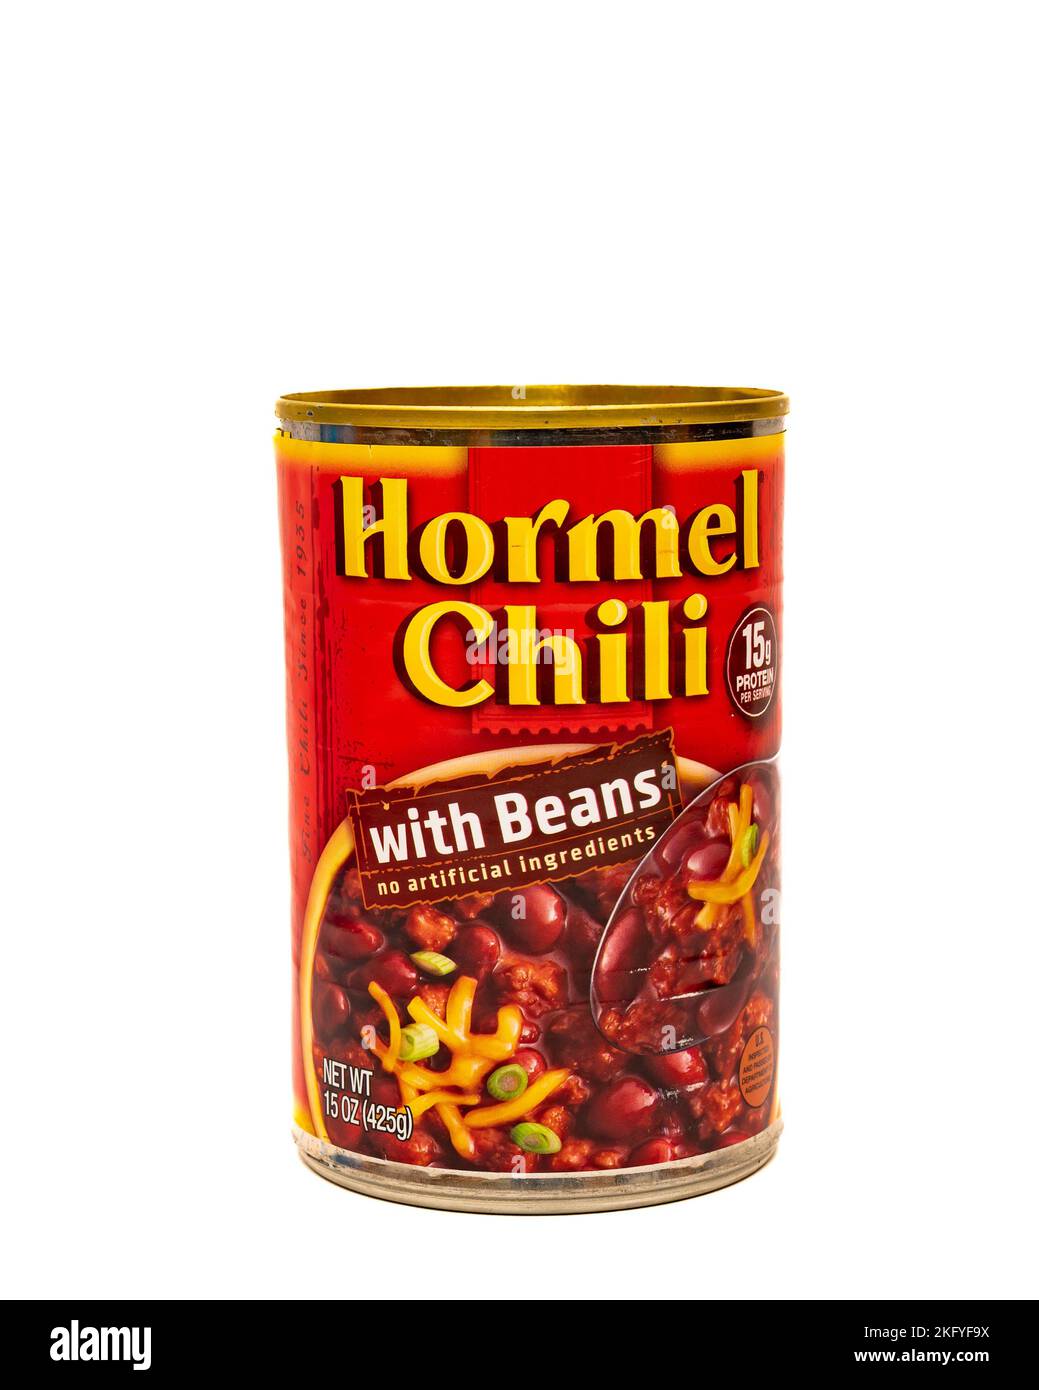 A can of Hormel Chili with beans, a delightful meal with no artificial ingredients and no preservatives Stock Photo